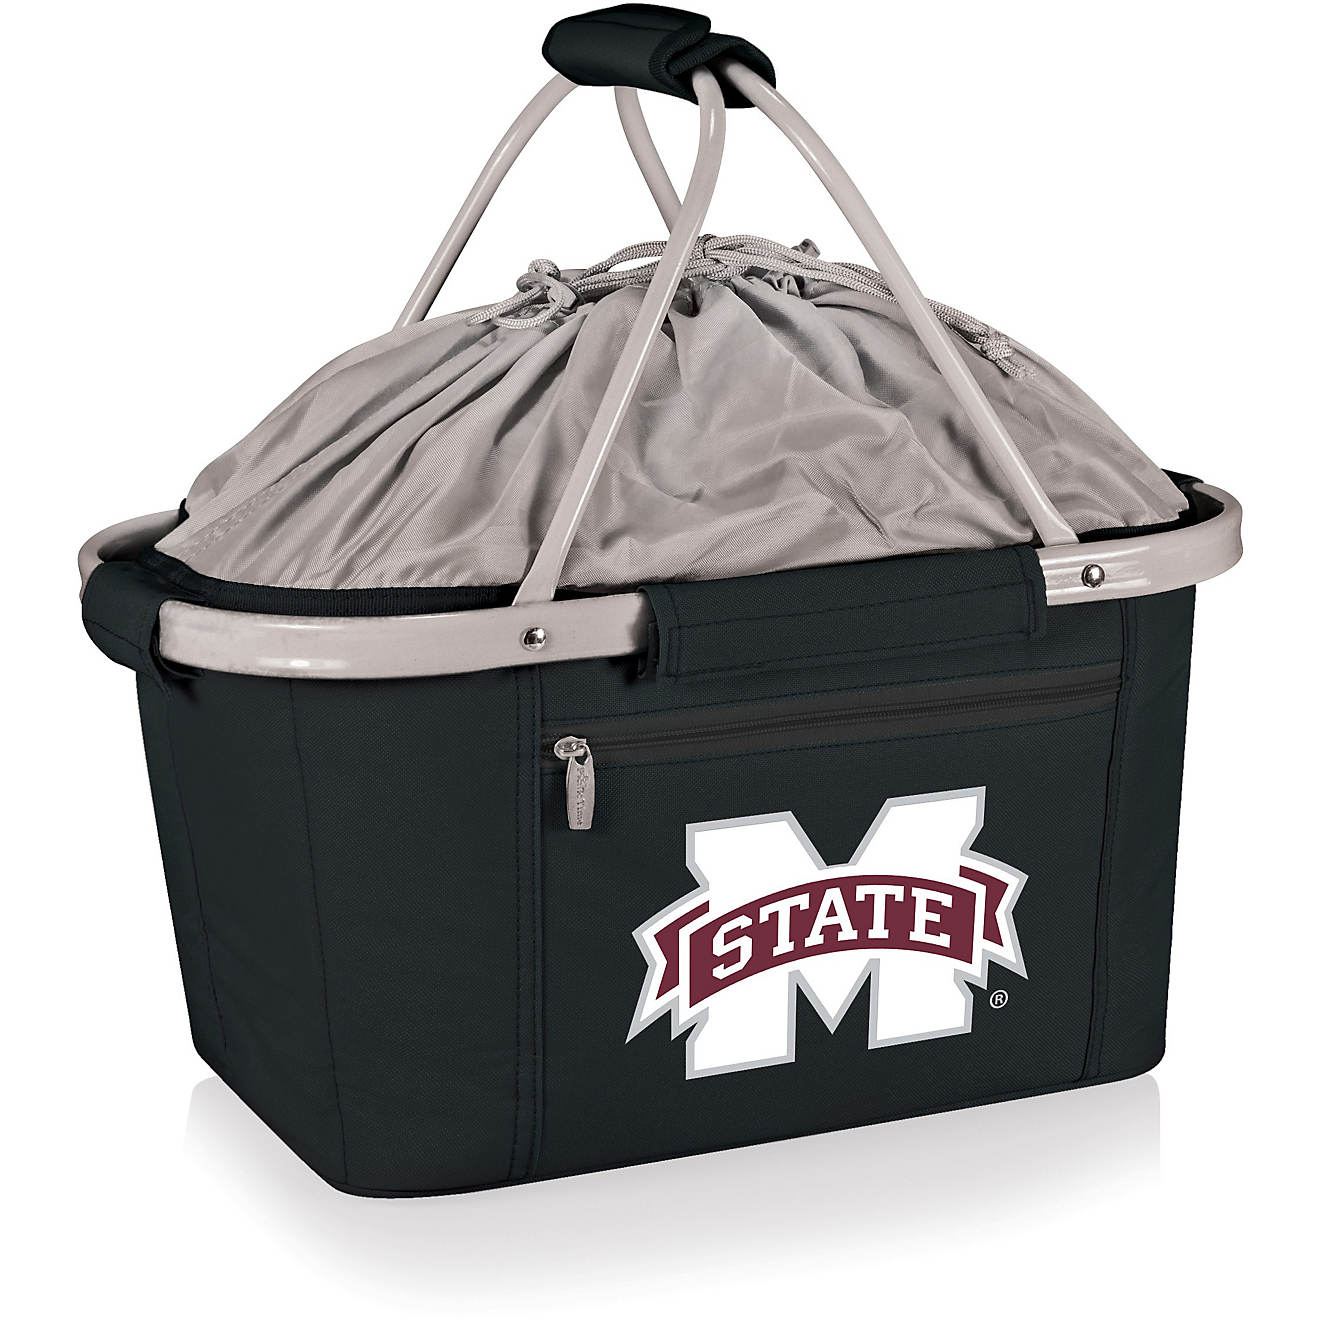 Picnic Time Mississippi State University Metro Basket Collapsible Tote                                                           - view number 1